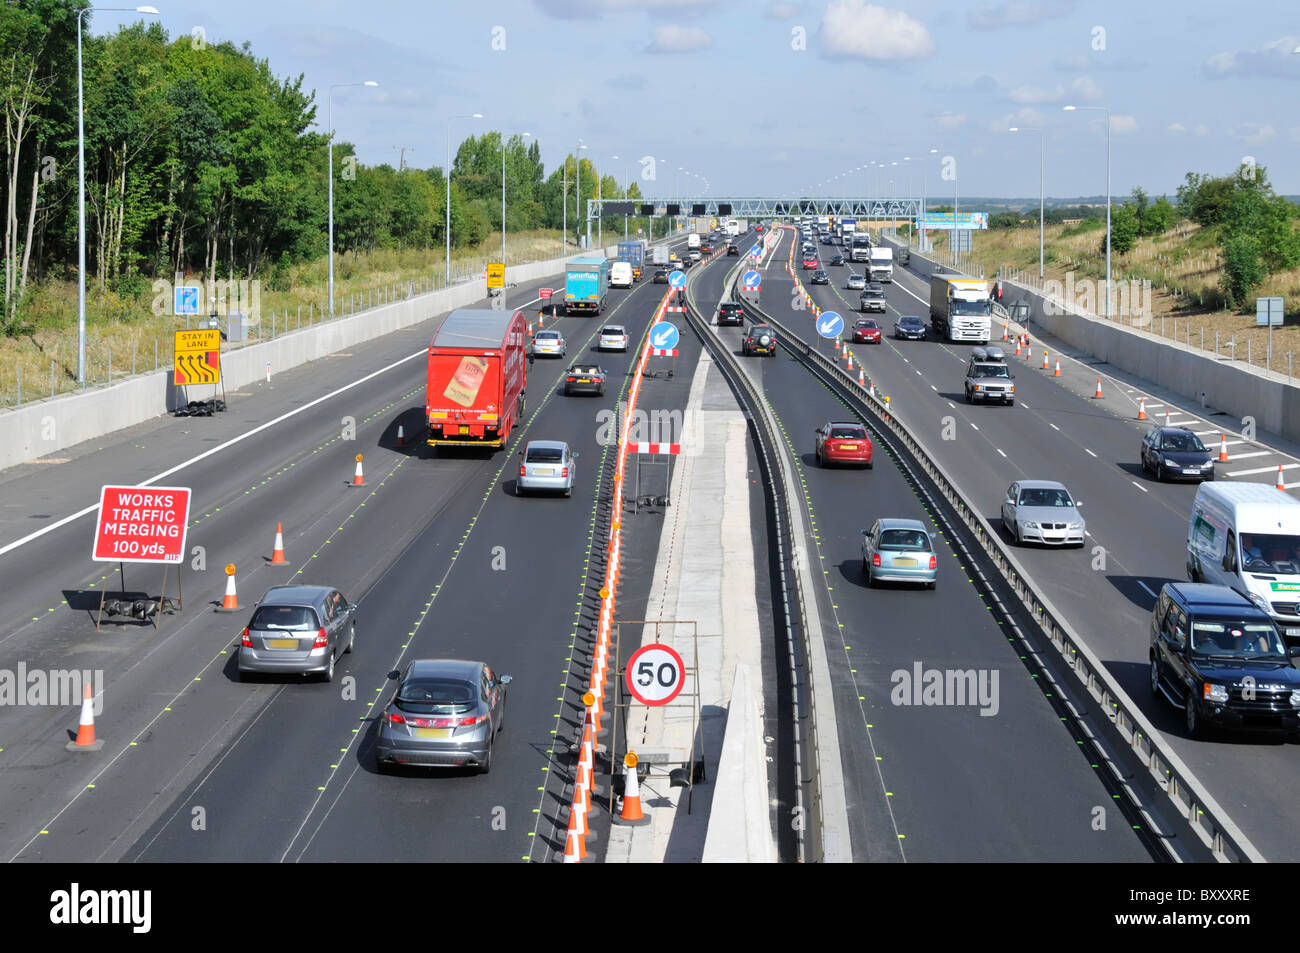 M25 motorway cross over lanes contra flow in road works widening to four lanes Civil Engineering project nears completion Essex countryside England UK Stock Photo